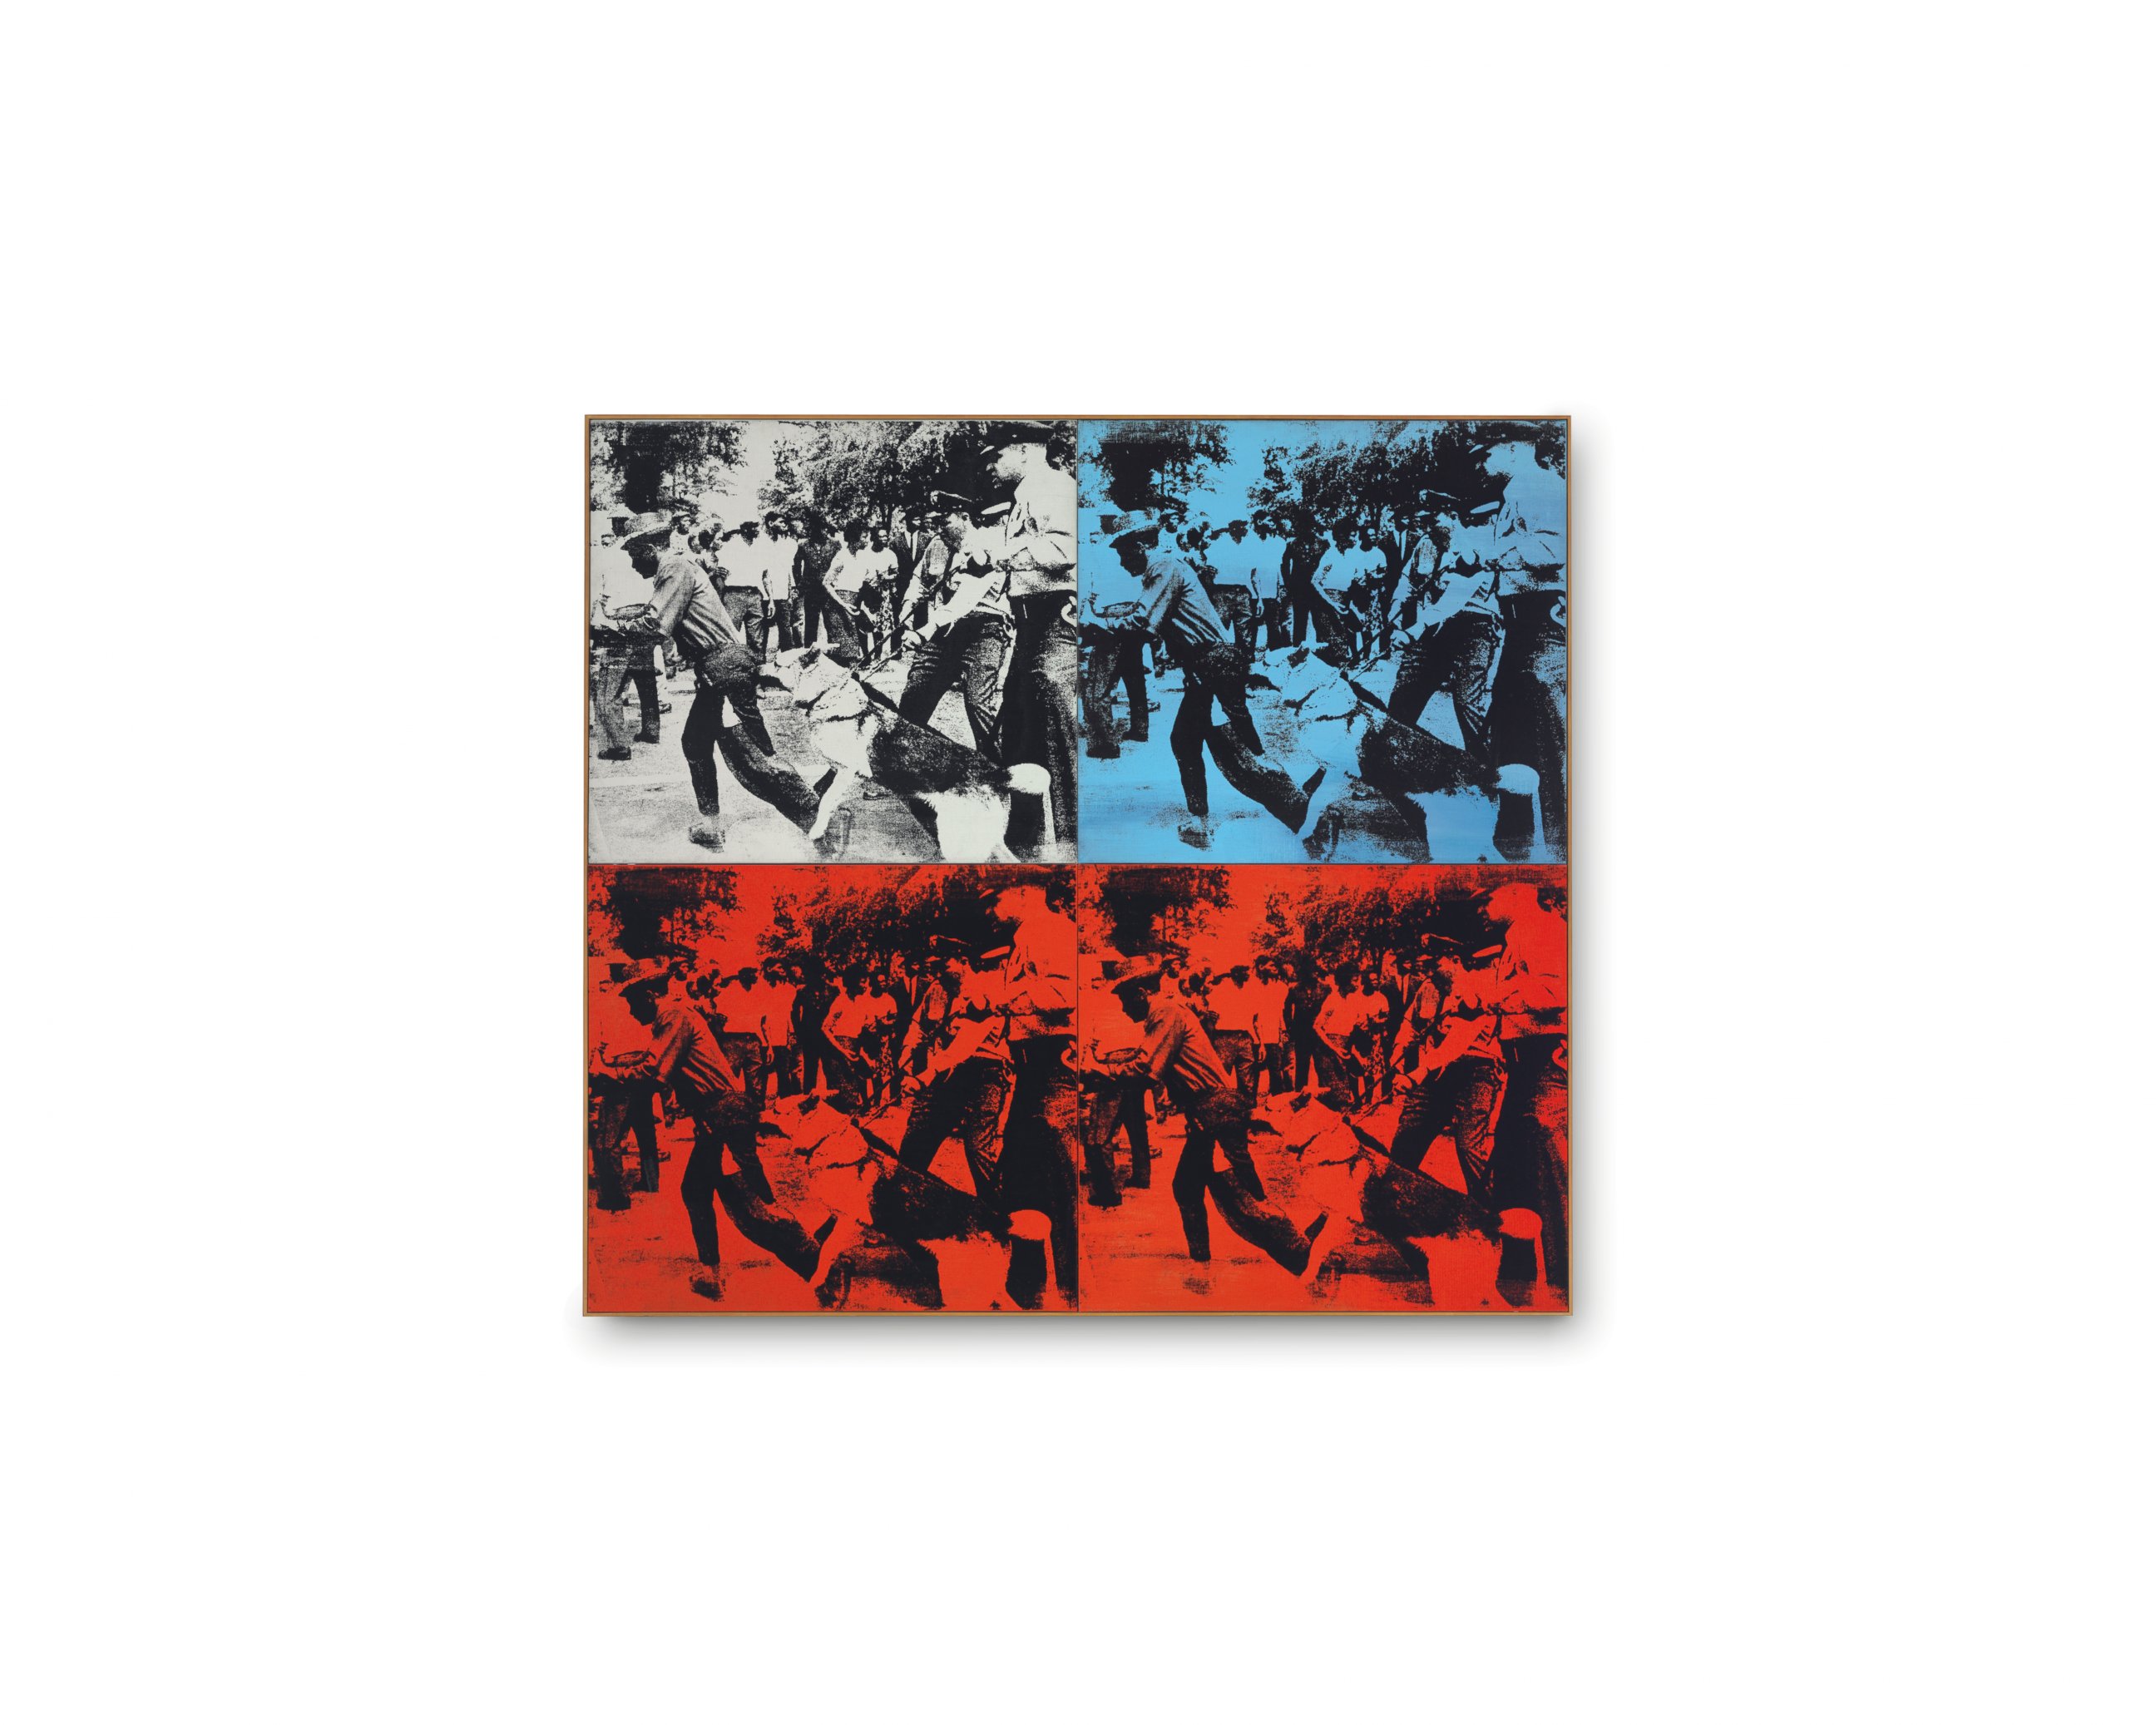 PHOTO: "Race Riot" by Andy Warhol sold for $62,885,000.